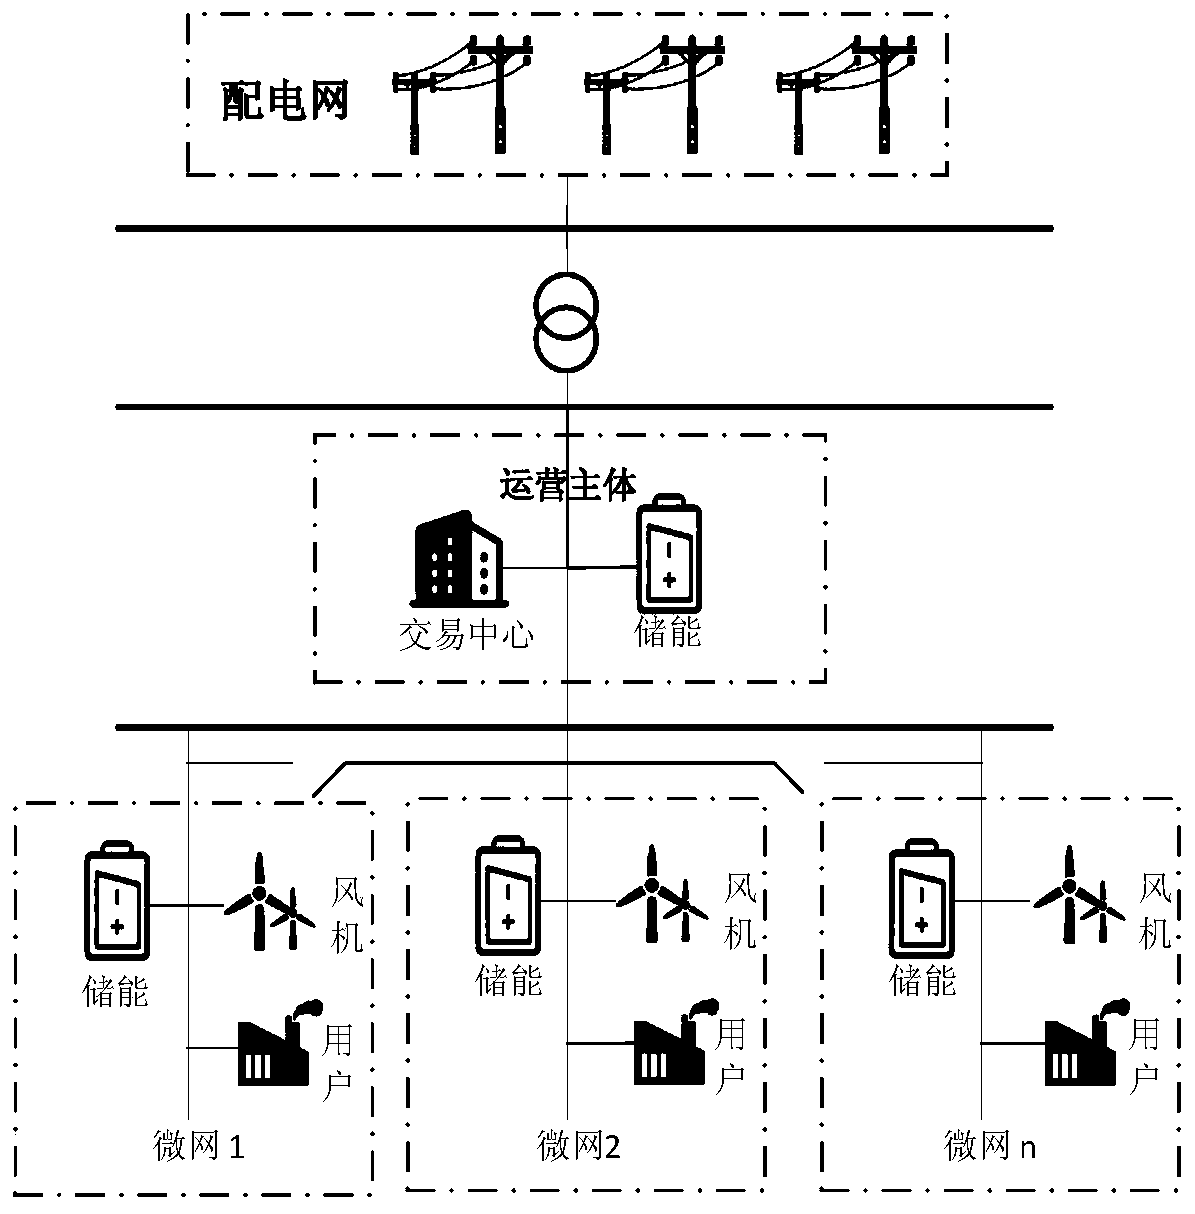 Regional multi-microgrid power distribution network interaction method by considering wind power consumption